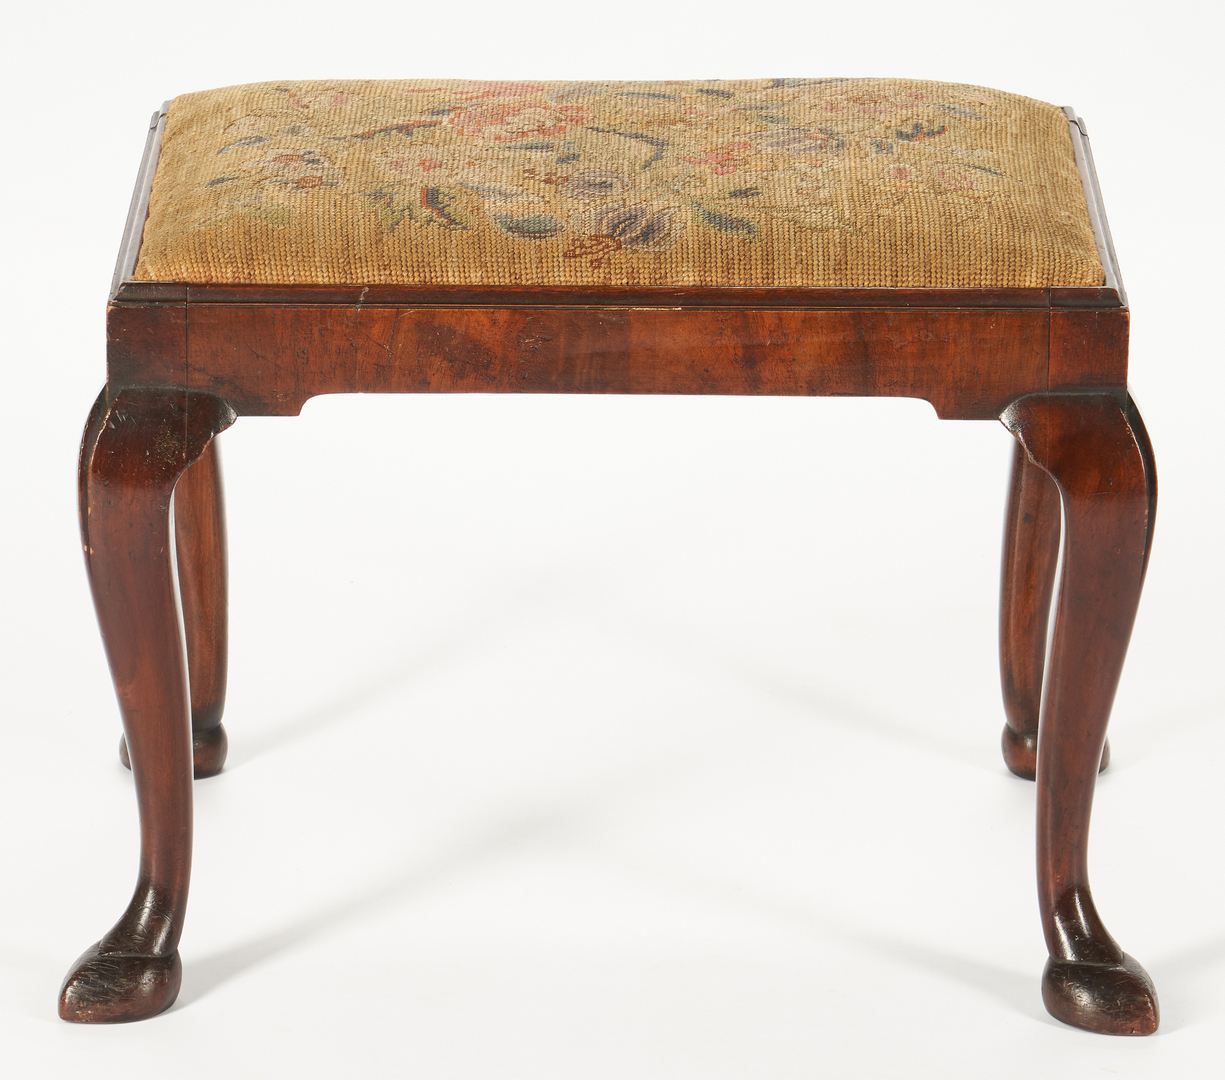 Lot 238: Pair of Irish Queen Anne chairs + footstool